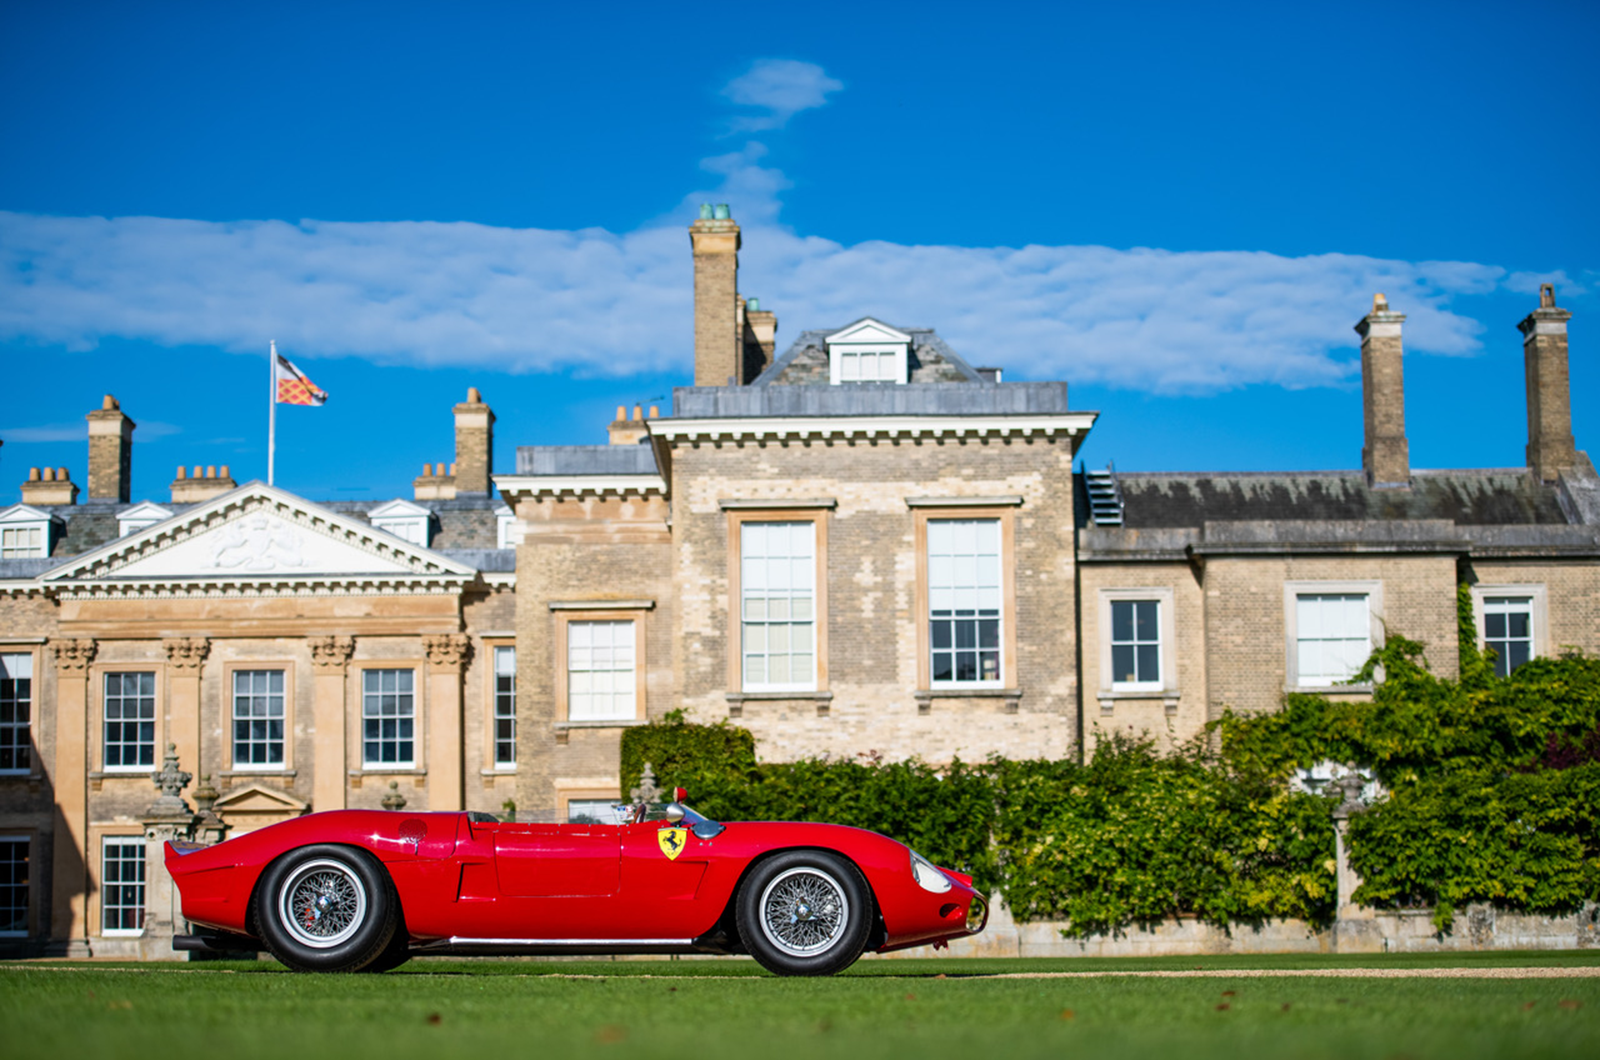 Classic & Sports Car – Rare ‘shark-nose’ Ferrari to debut at new British concours